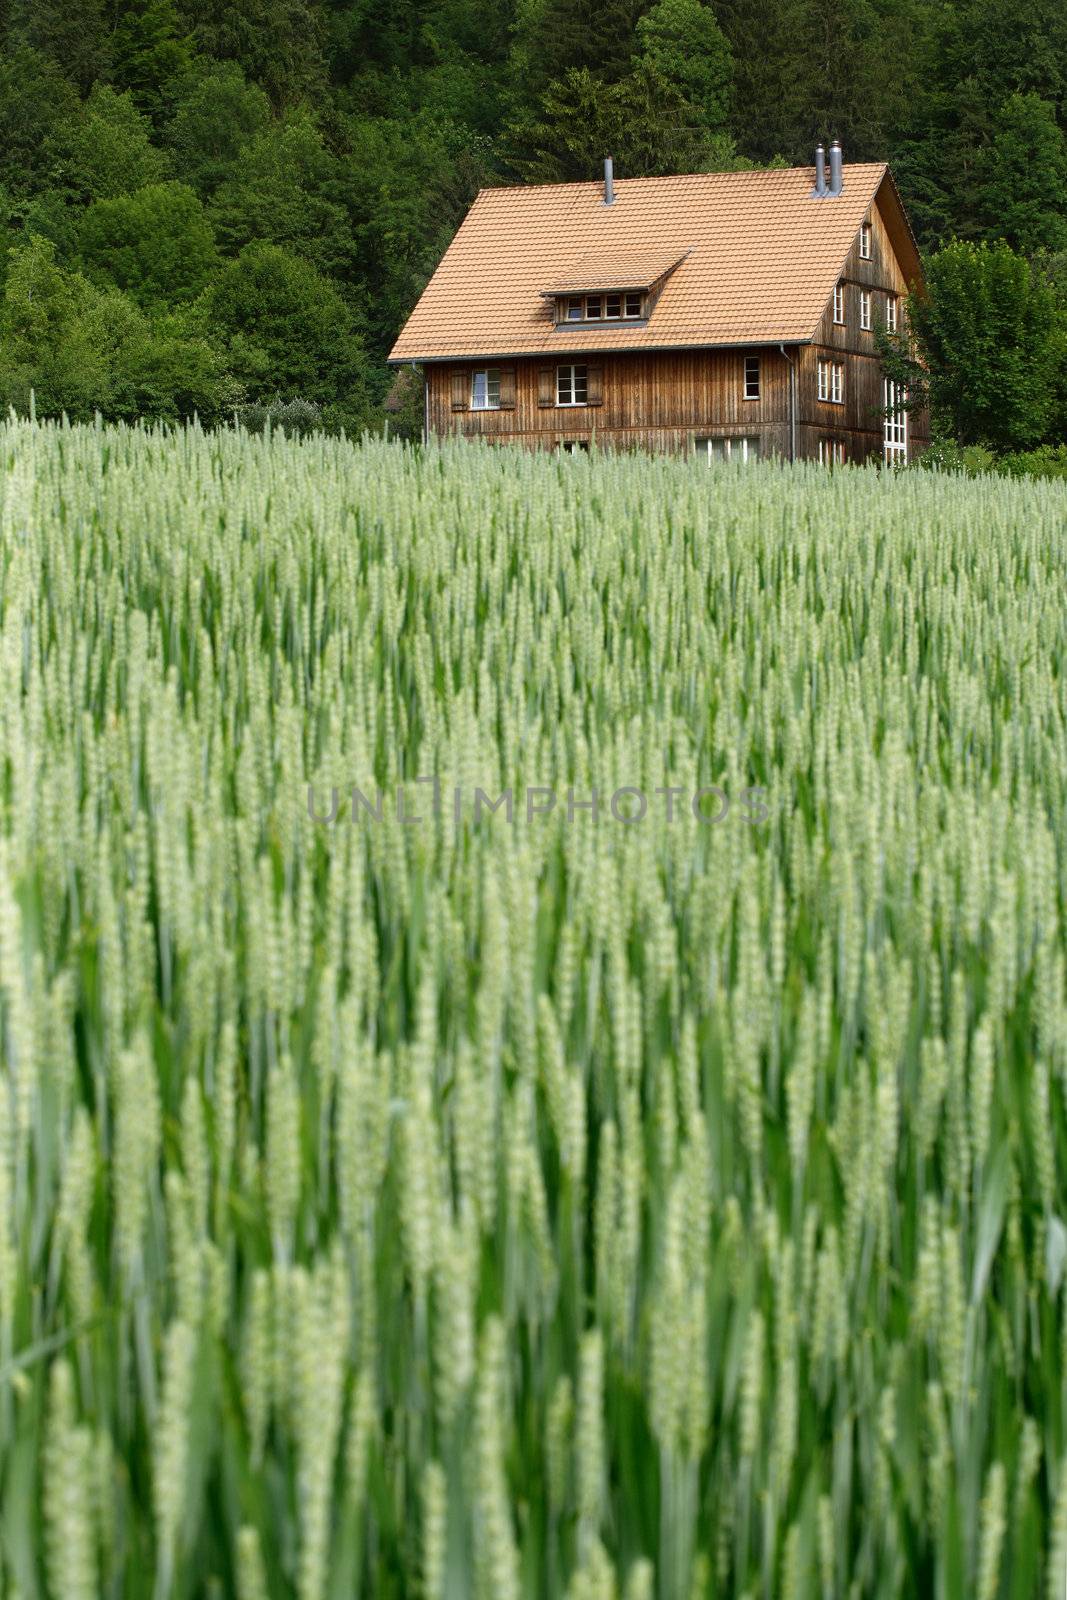 House in the wheat field by sumners